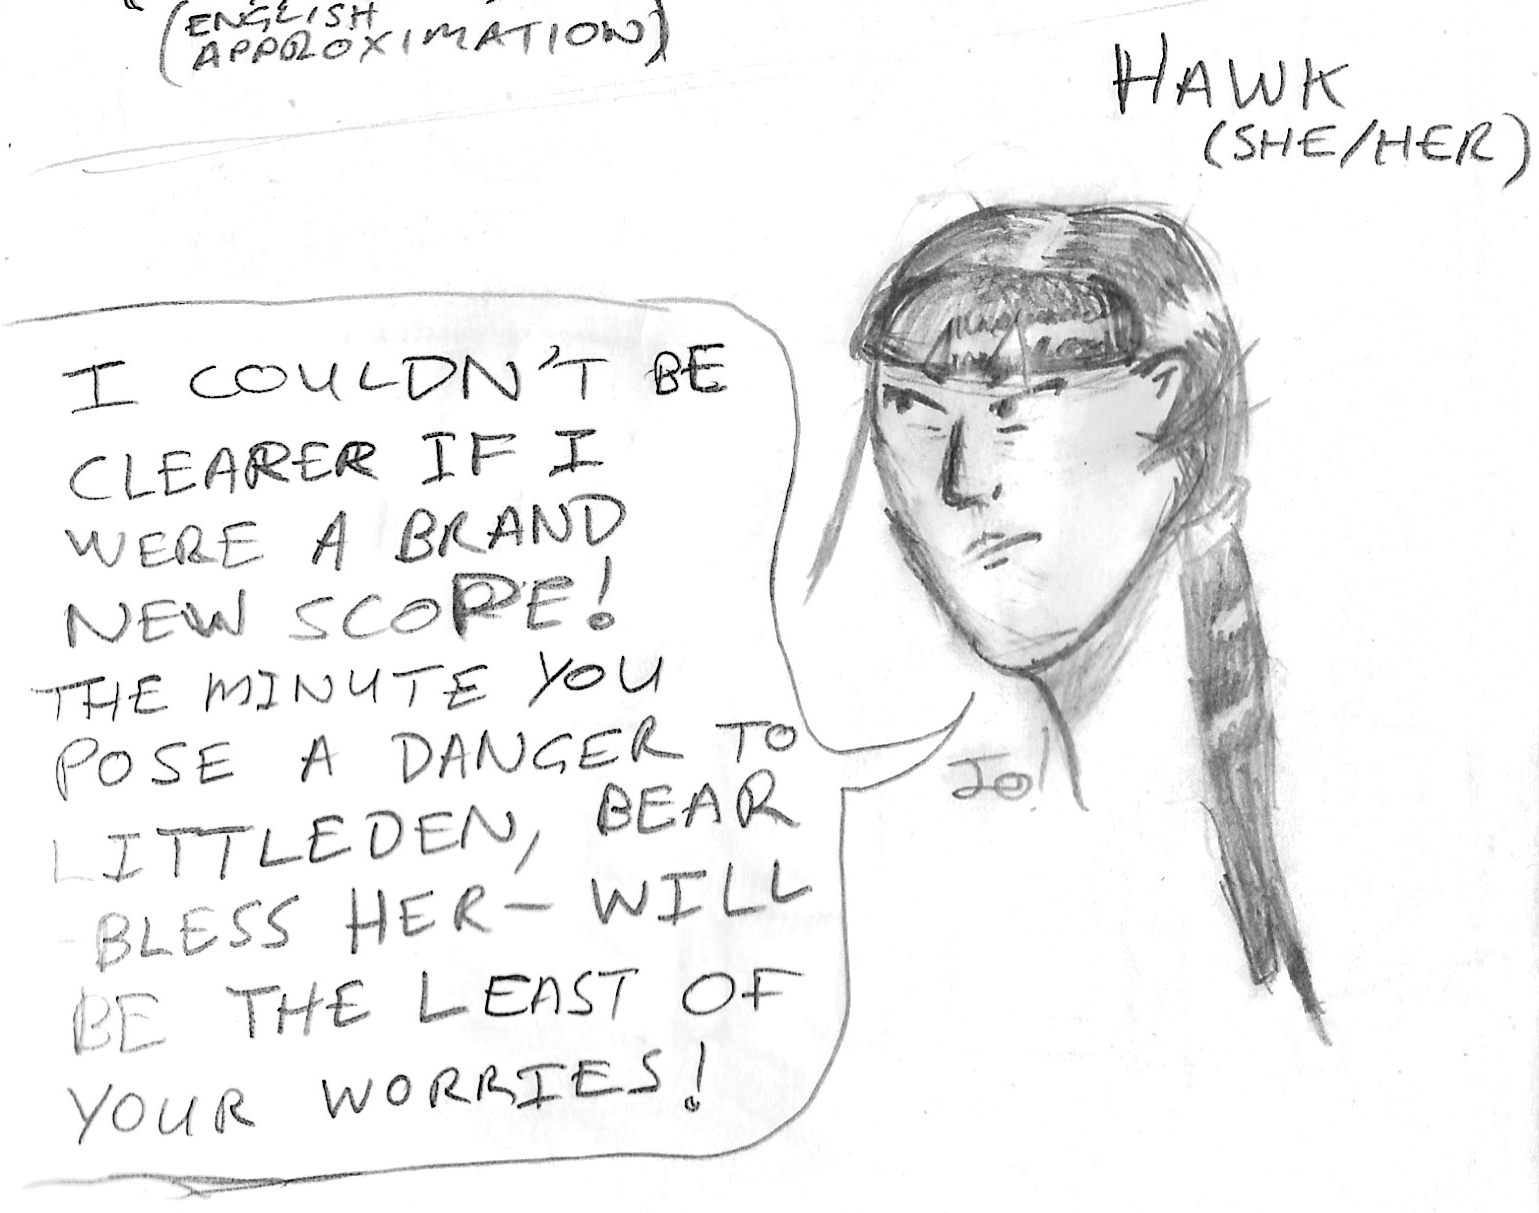 Sketch of Hawk (She/Her), a white woman with black hair, tied back in a ponytail. She says "I couldn't be clearer if I were a brand new scope! The minute you pose a danger to Littleden, Bear -- bless her heart -- will be the least of your worries!"